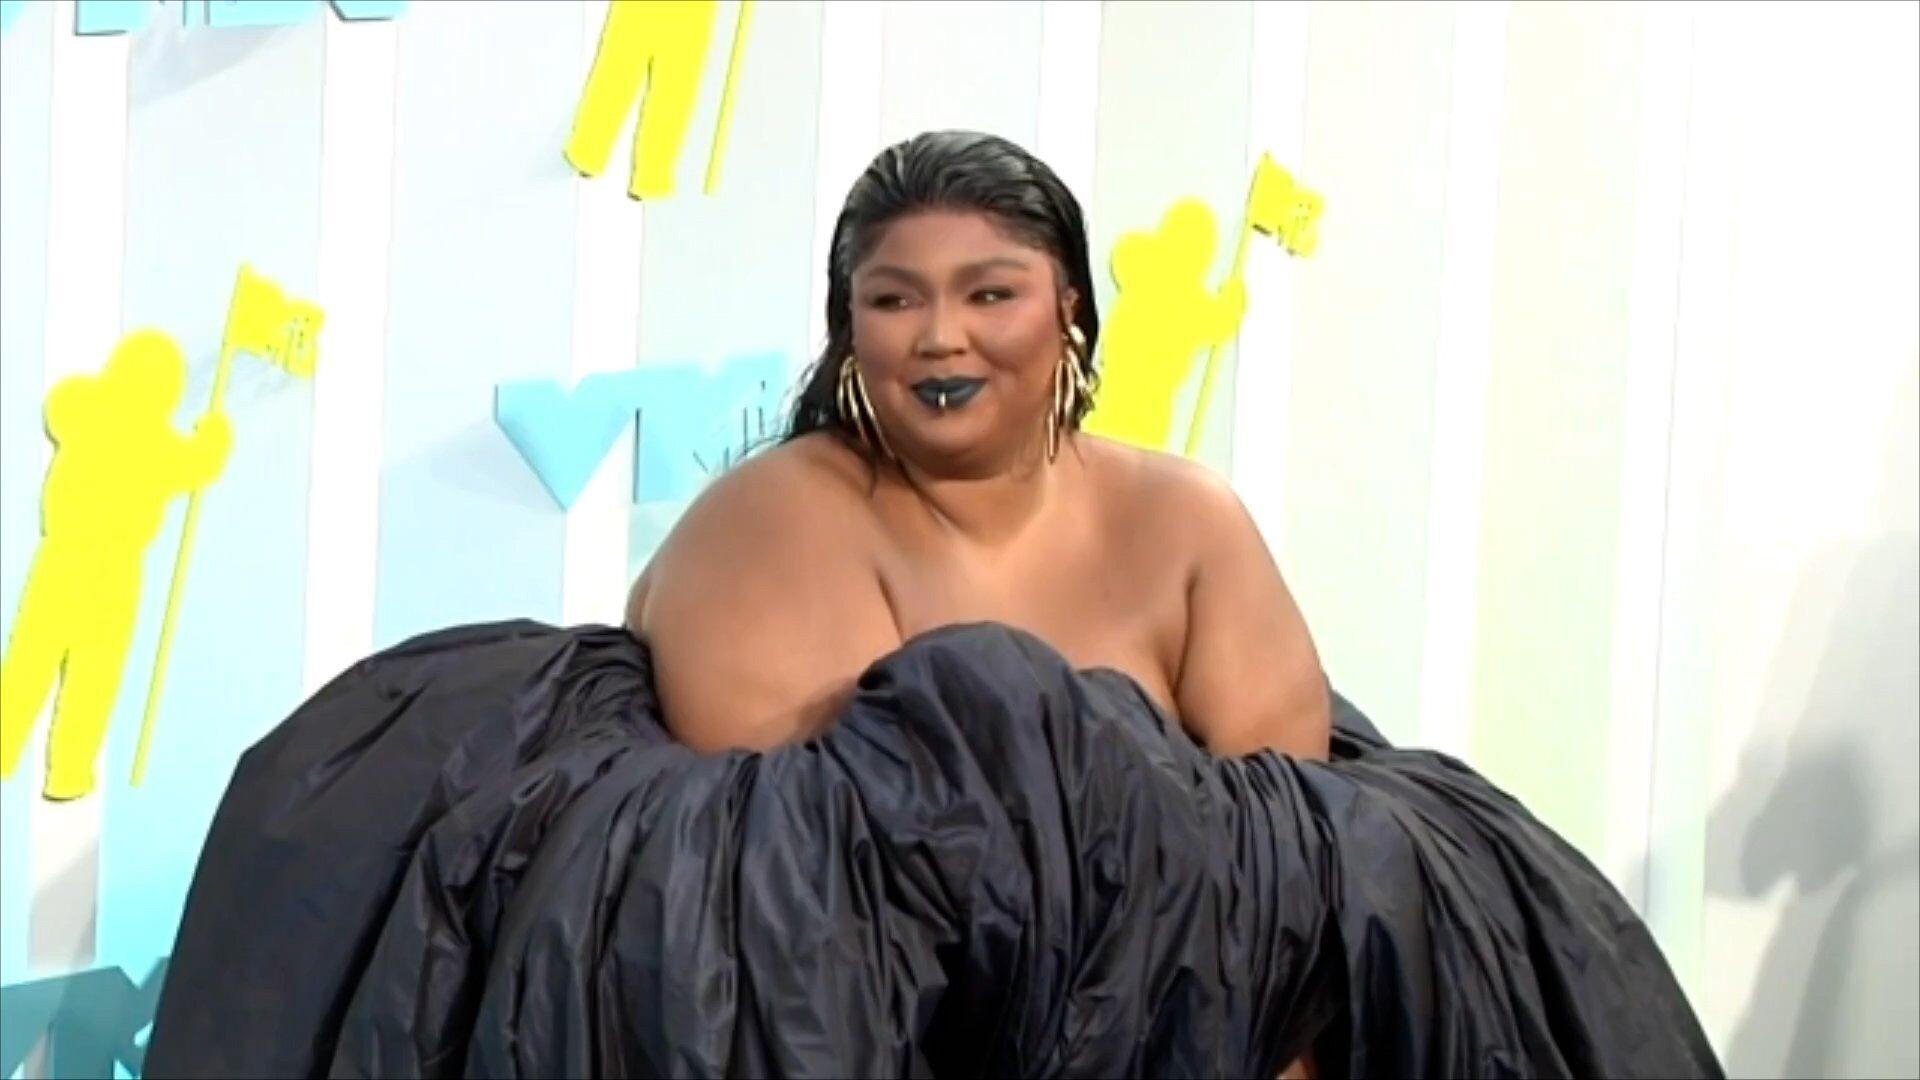 Lizzo seemingly responds to Kanye West's comments about her weight